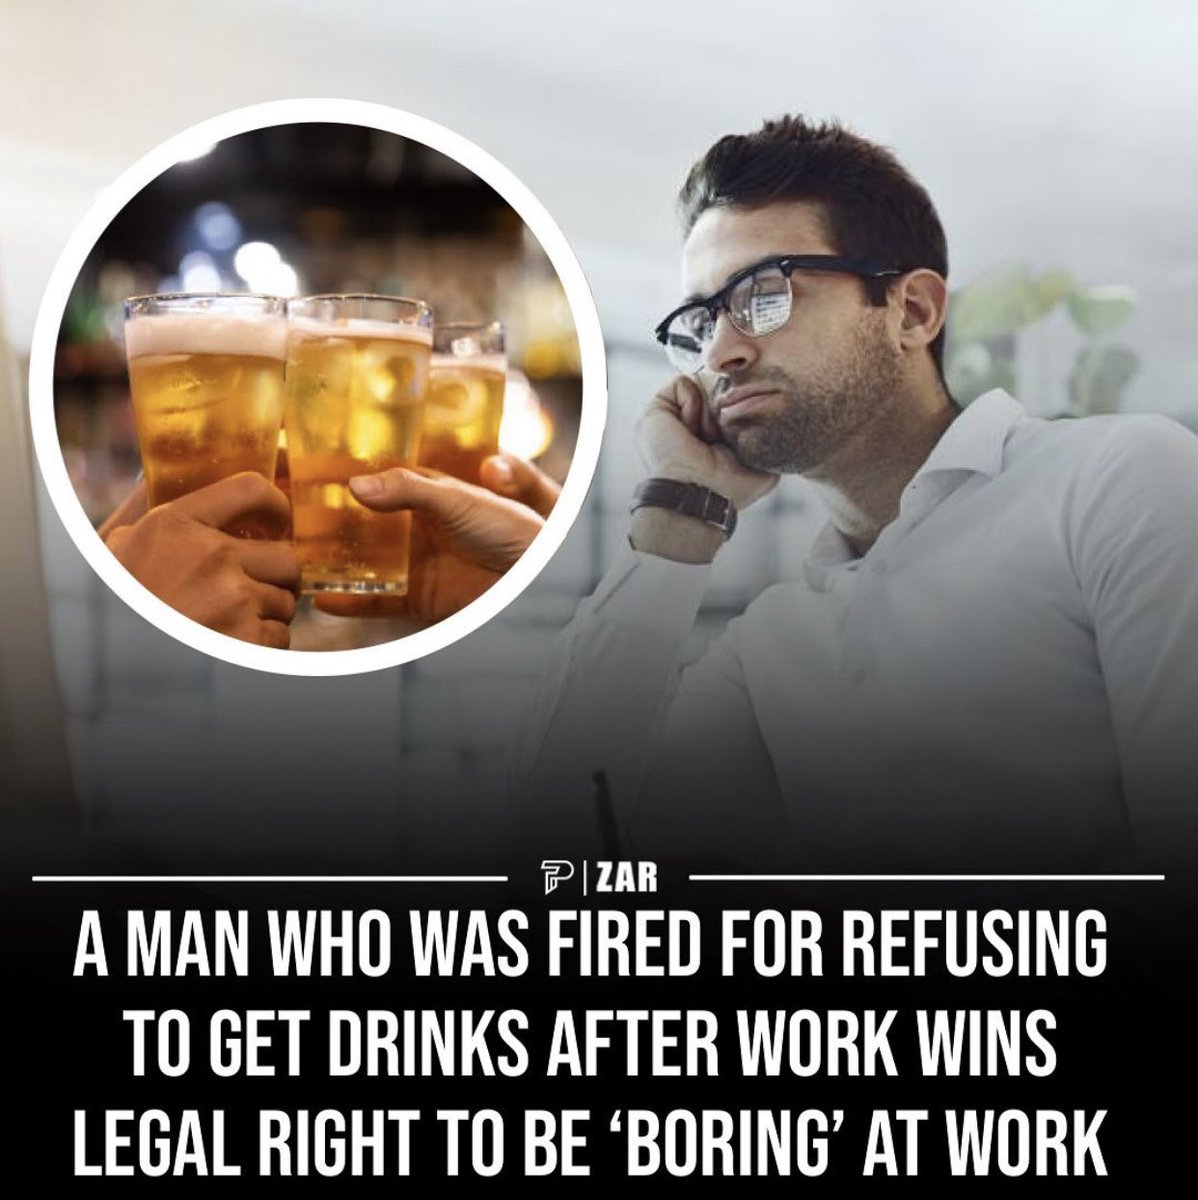 dudes posting their w's - photo caption - Pizar A Man Who Was Fired For Refusing To Get Drinks After Work Wins Legal Right To Be 'Boring' At Work